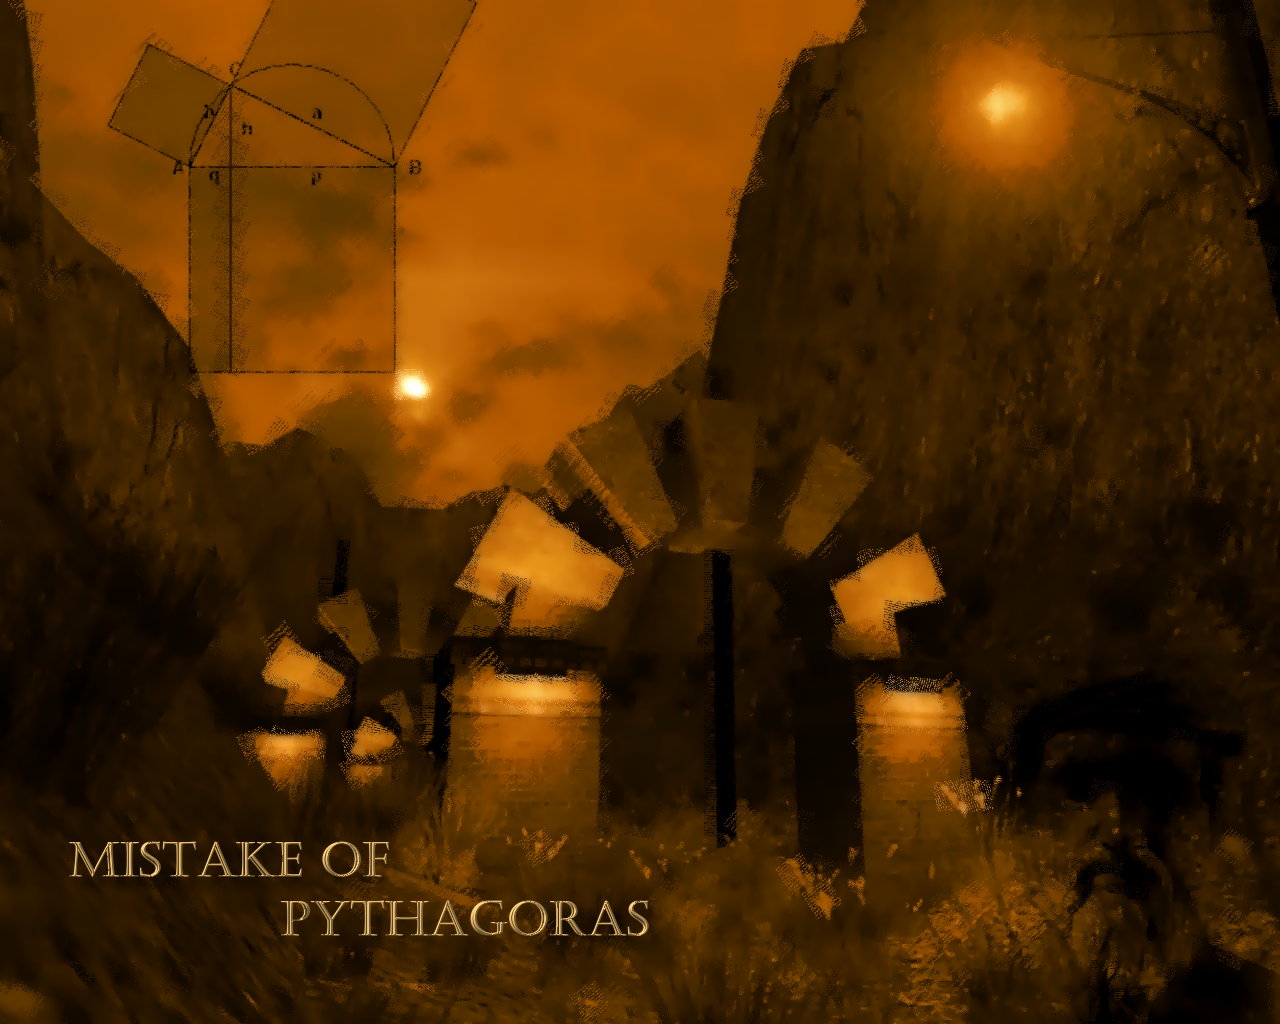 Mistake of Pythagoras by 7asoud on